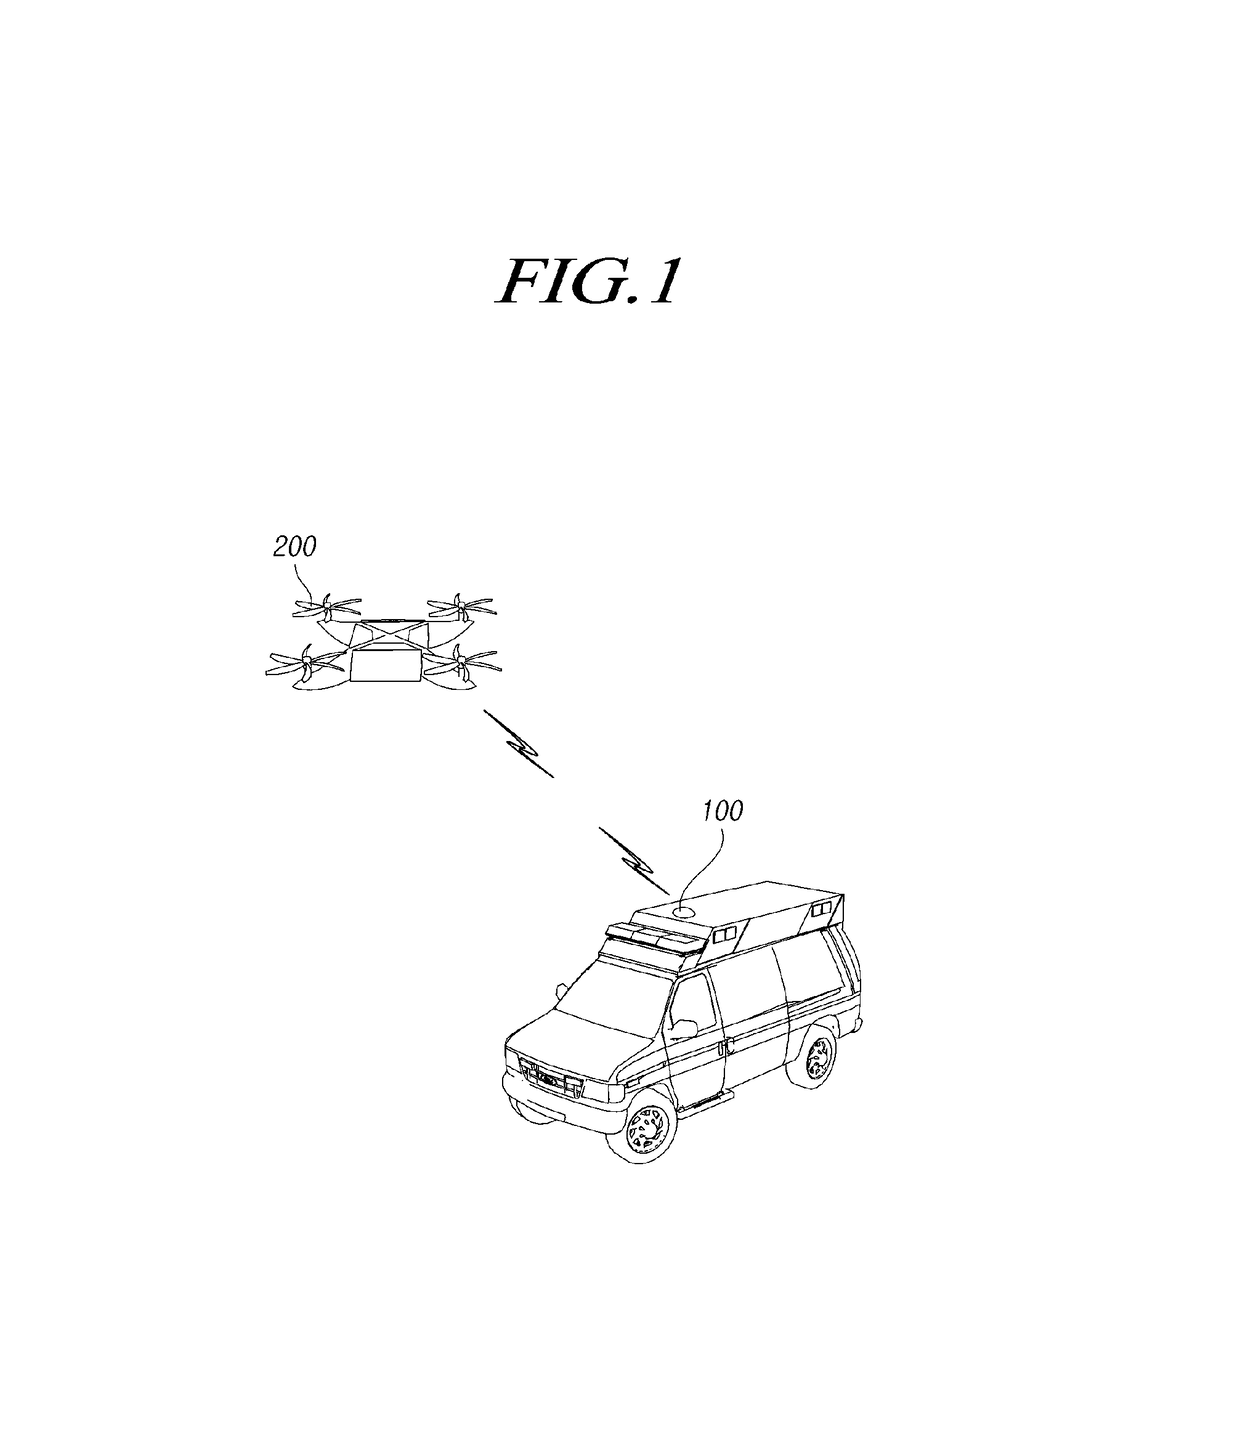 System for supporting emergency vehicle using drone